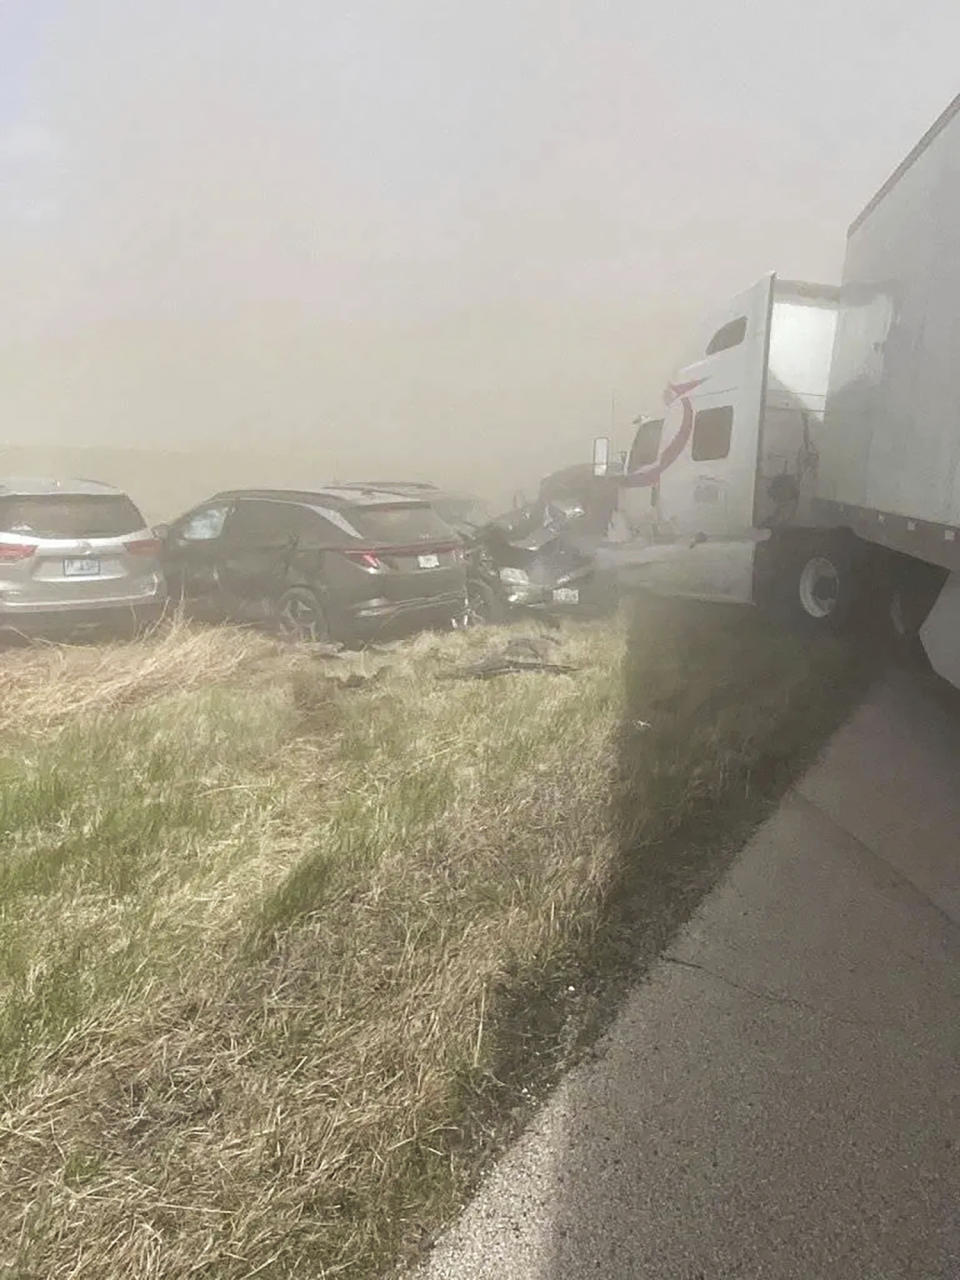 A crash involving at least 20 vehicles shut down a highway in Illinois, Monday, May 1, 2023. Illinois State Police say a windstorm that kicked up clouds of dust in south-central Illinois led to numerous crashes and multiple fatalities on Interstate 55. (WICS TV via AP)